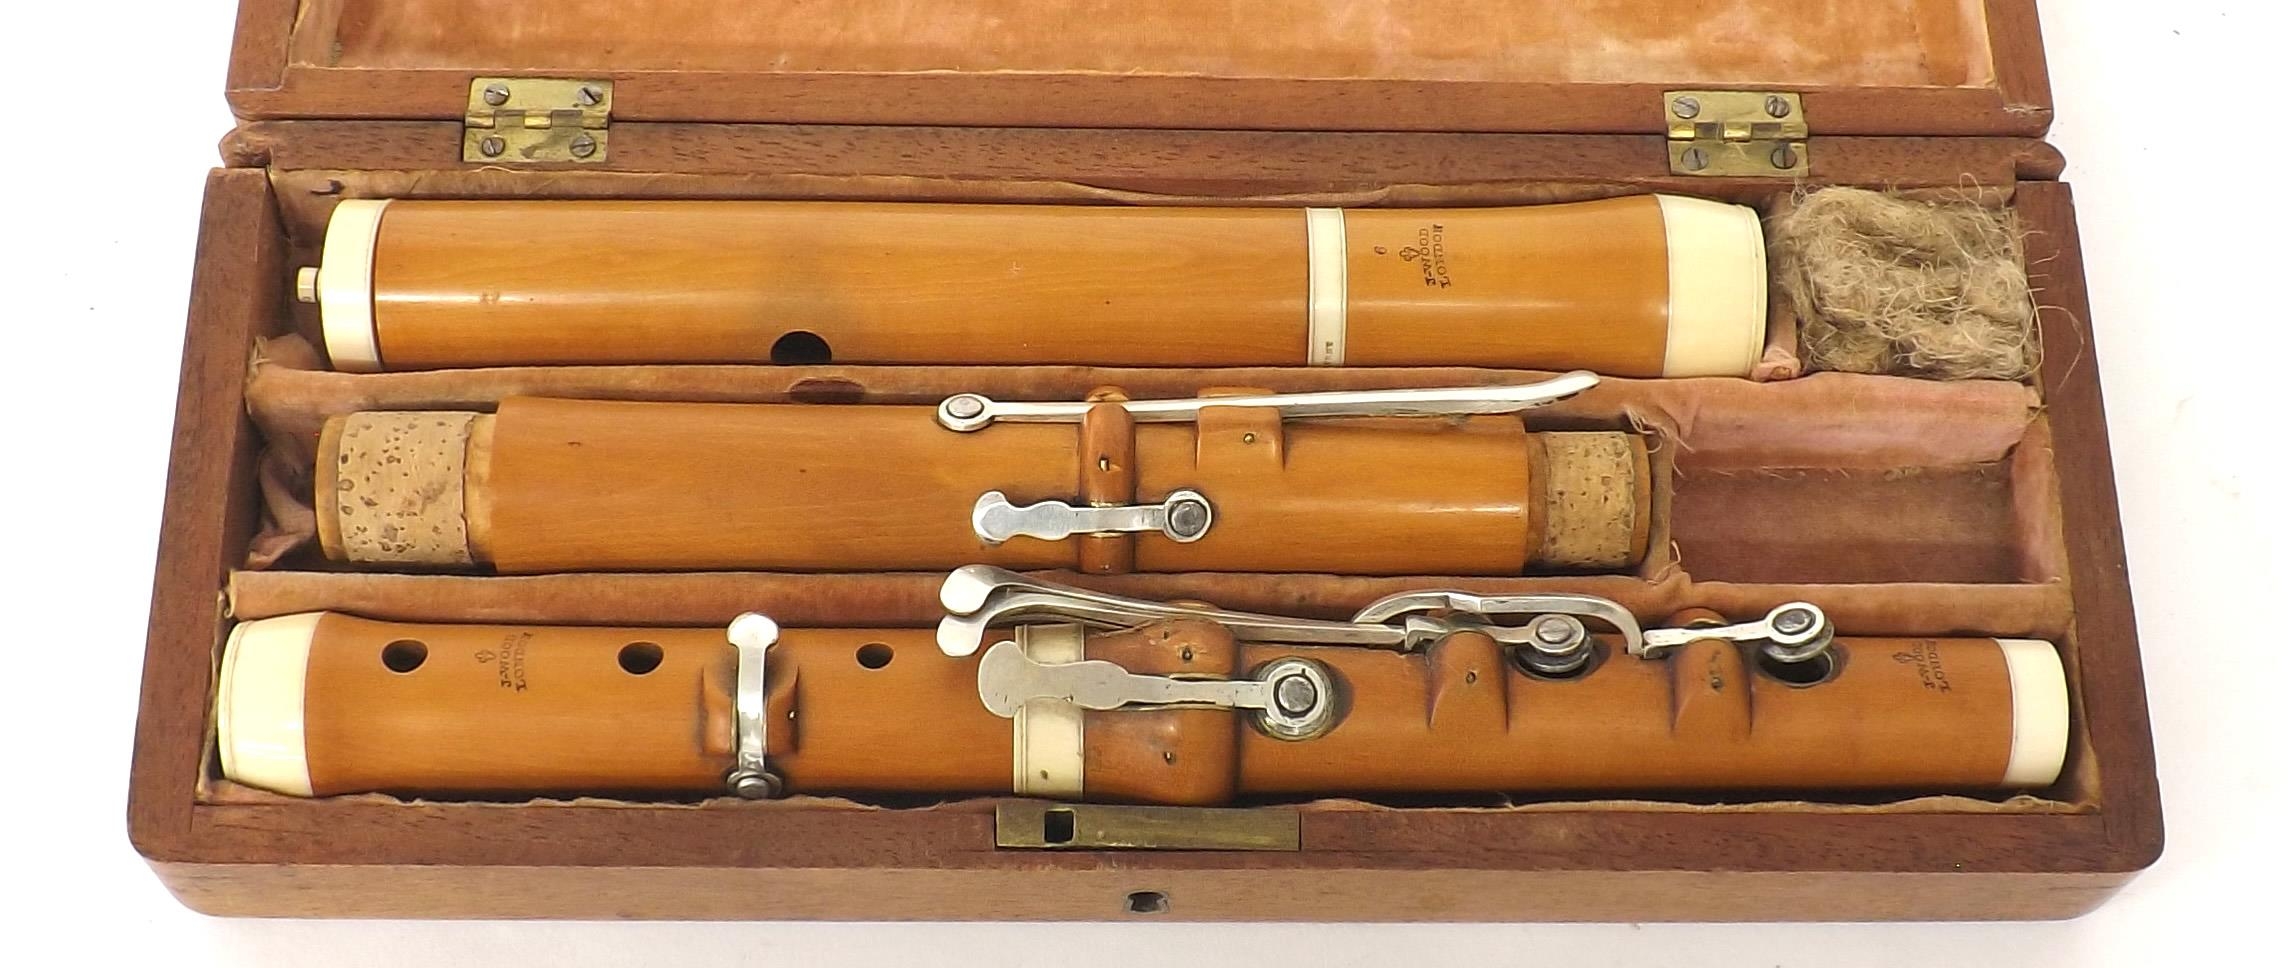 Boxwood and ivory flute by and stamped J. Wood, London, with eight silver keys on wooden blocks, - Image 2 of 2